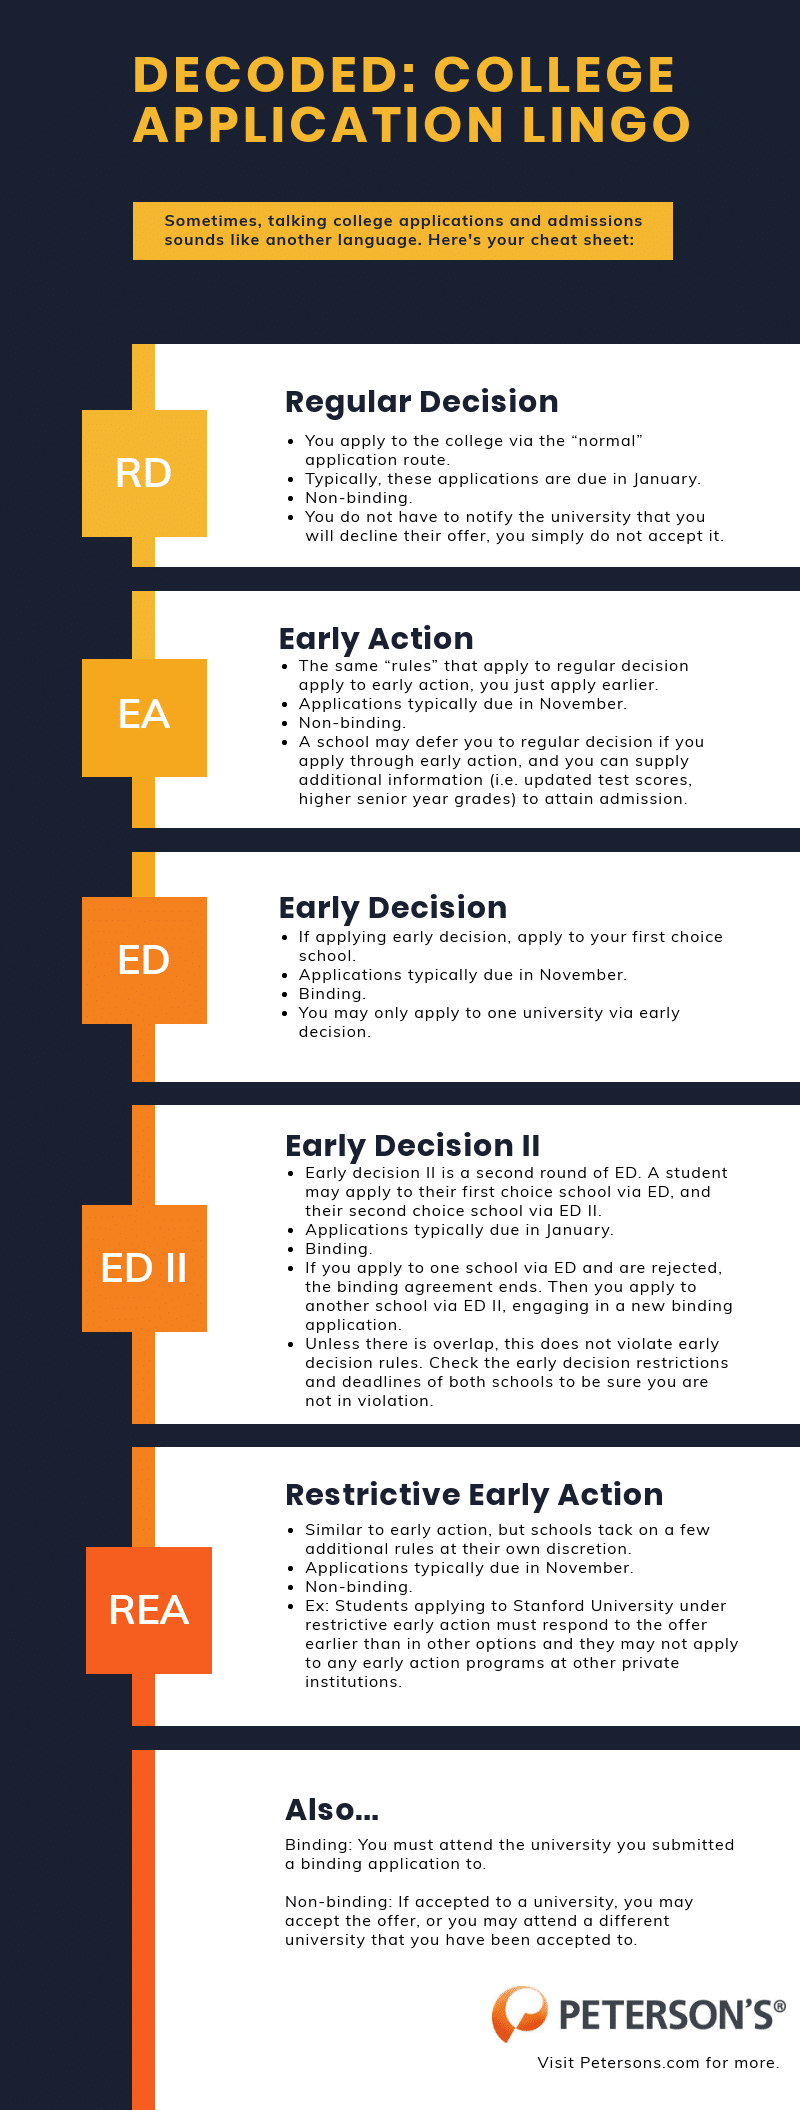 Infographic explaining the differences between various college application deadlines: regular decision, early action, early decision, early decision II, and restrictive early action.